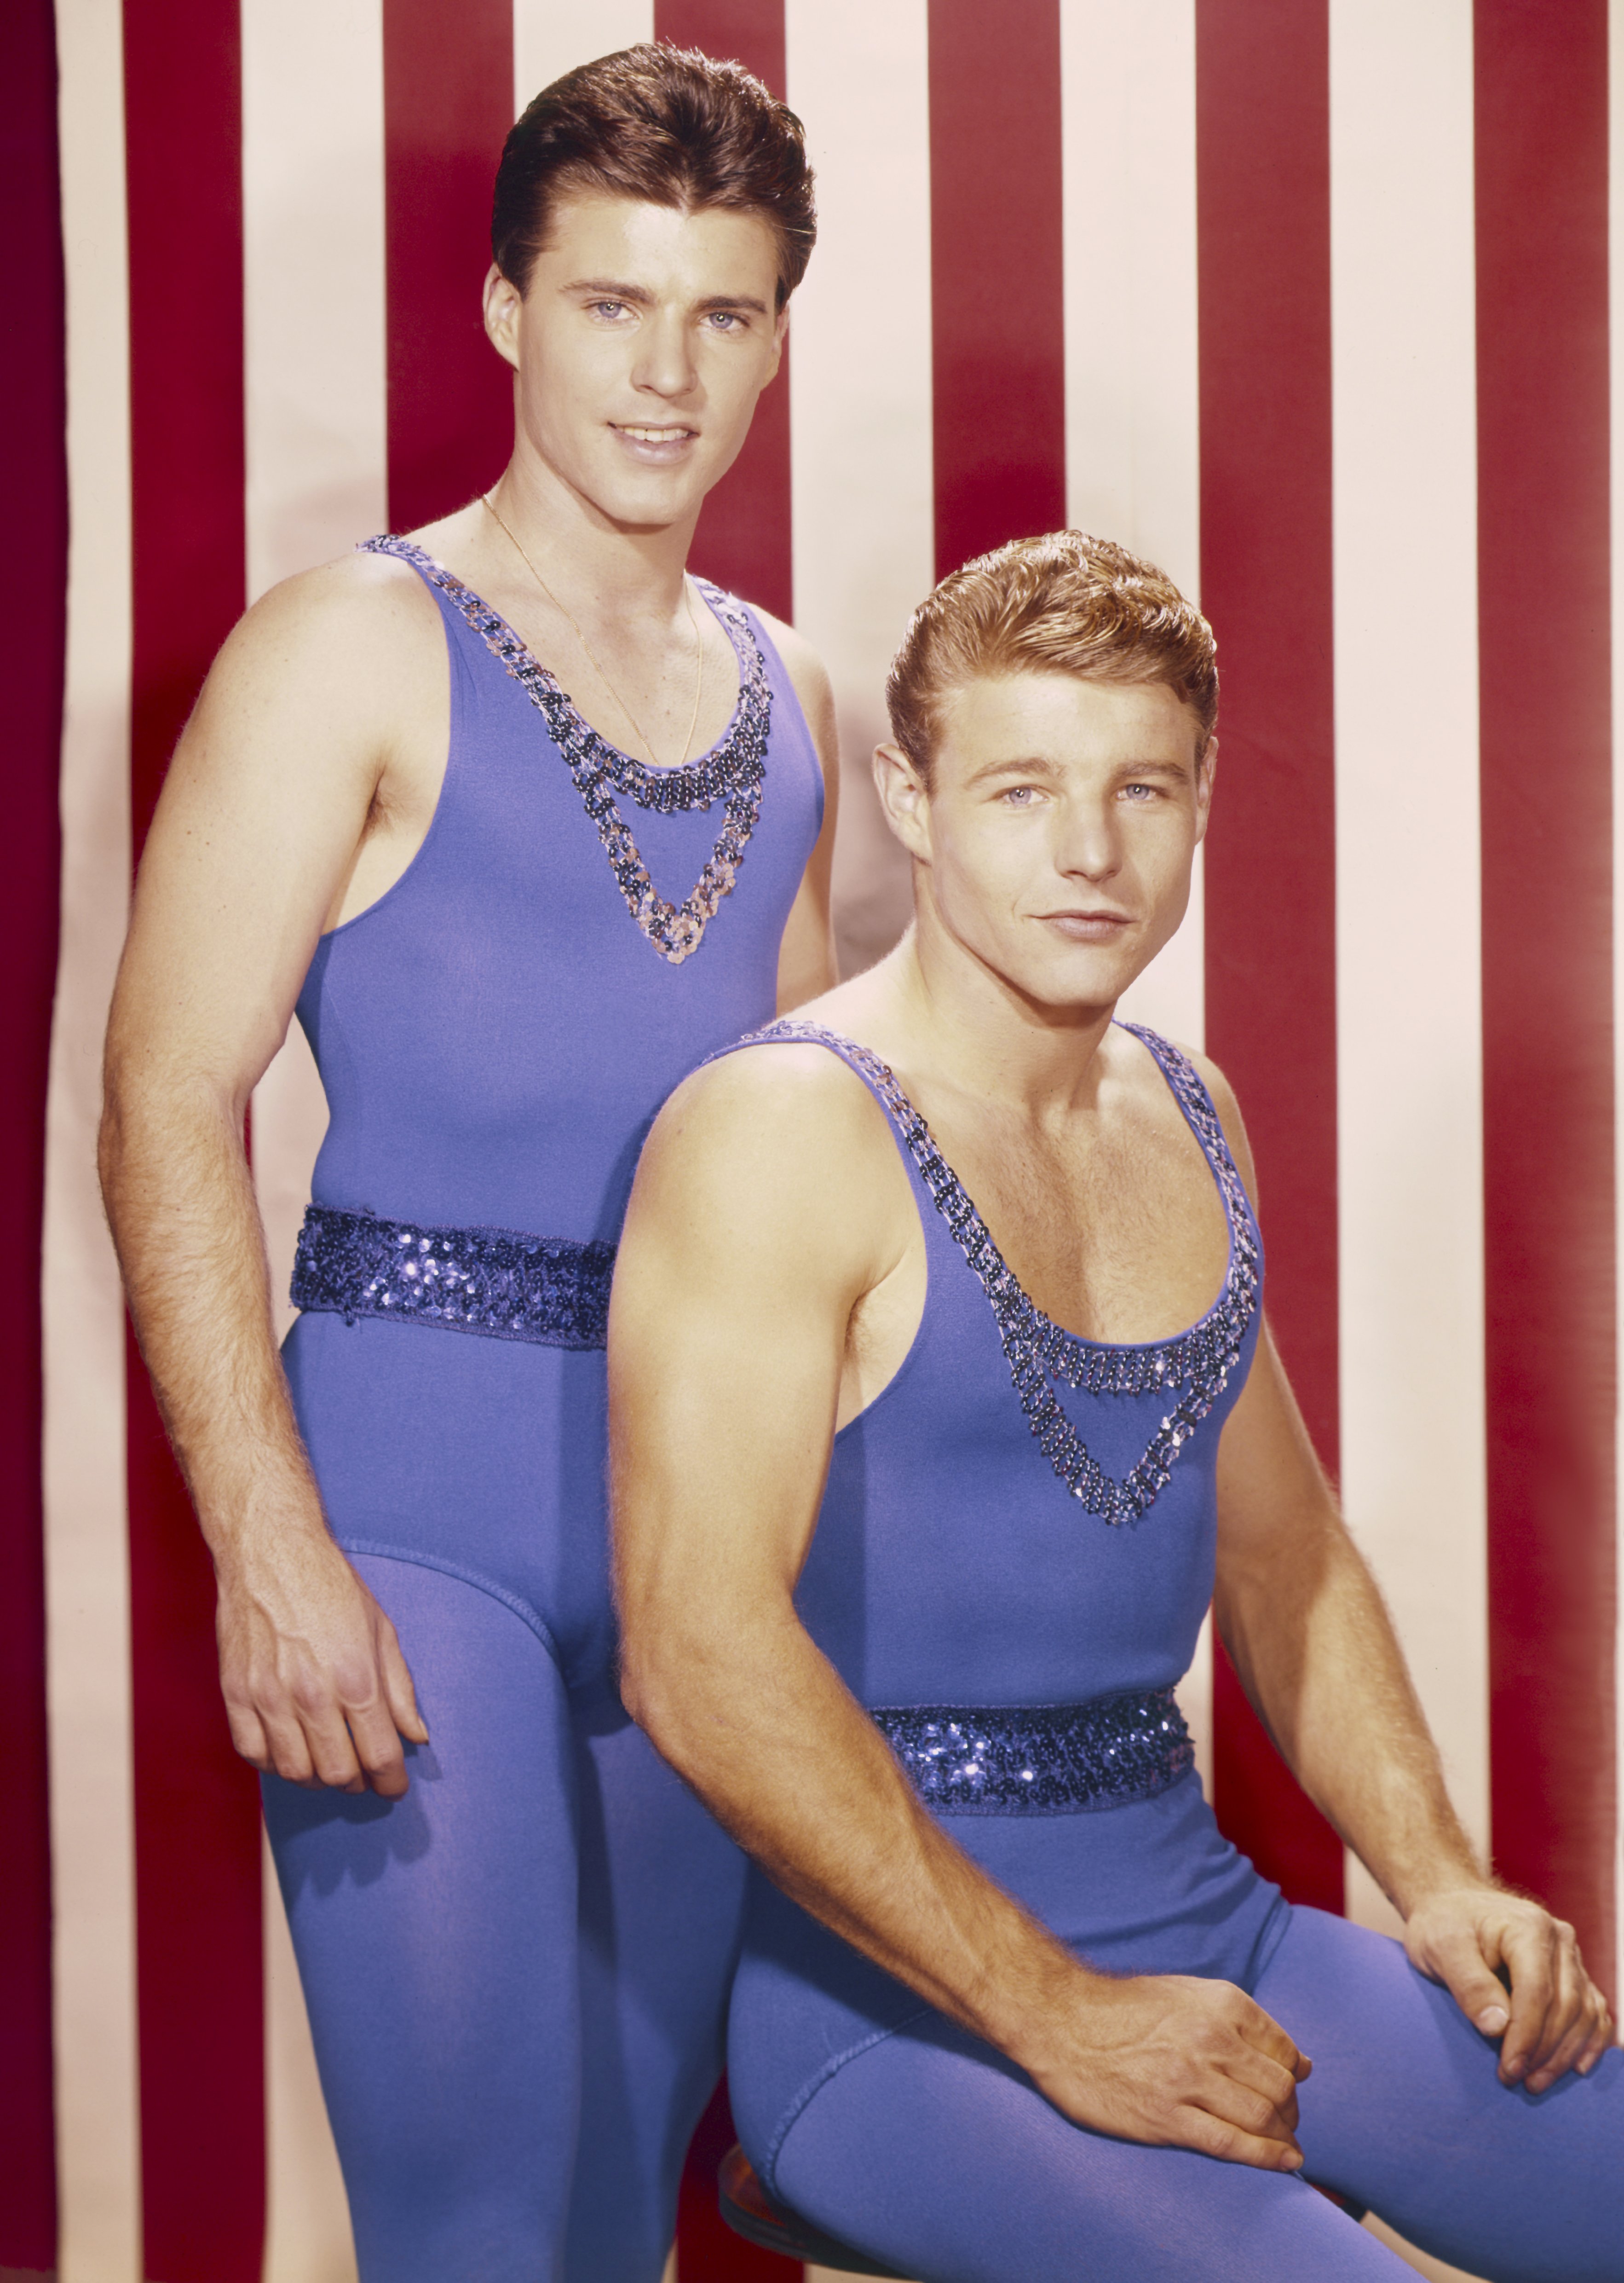 Ricky and David Nelson pose in circus wear circa 1960 | Source: Getty Images